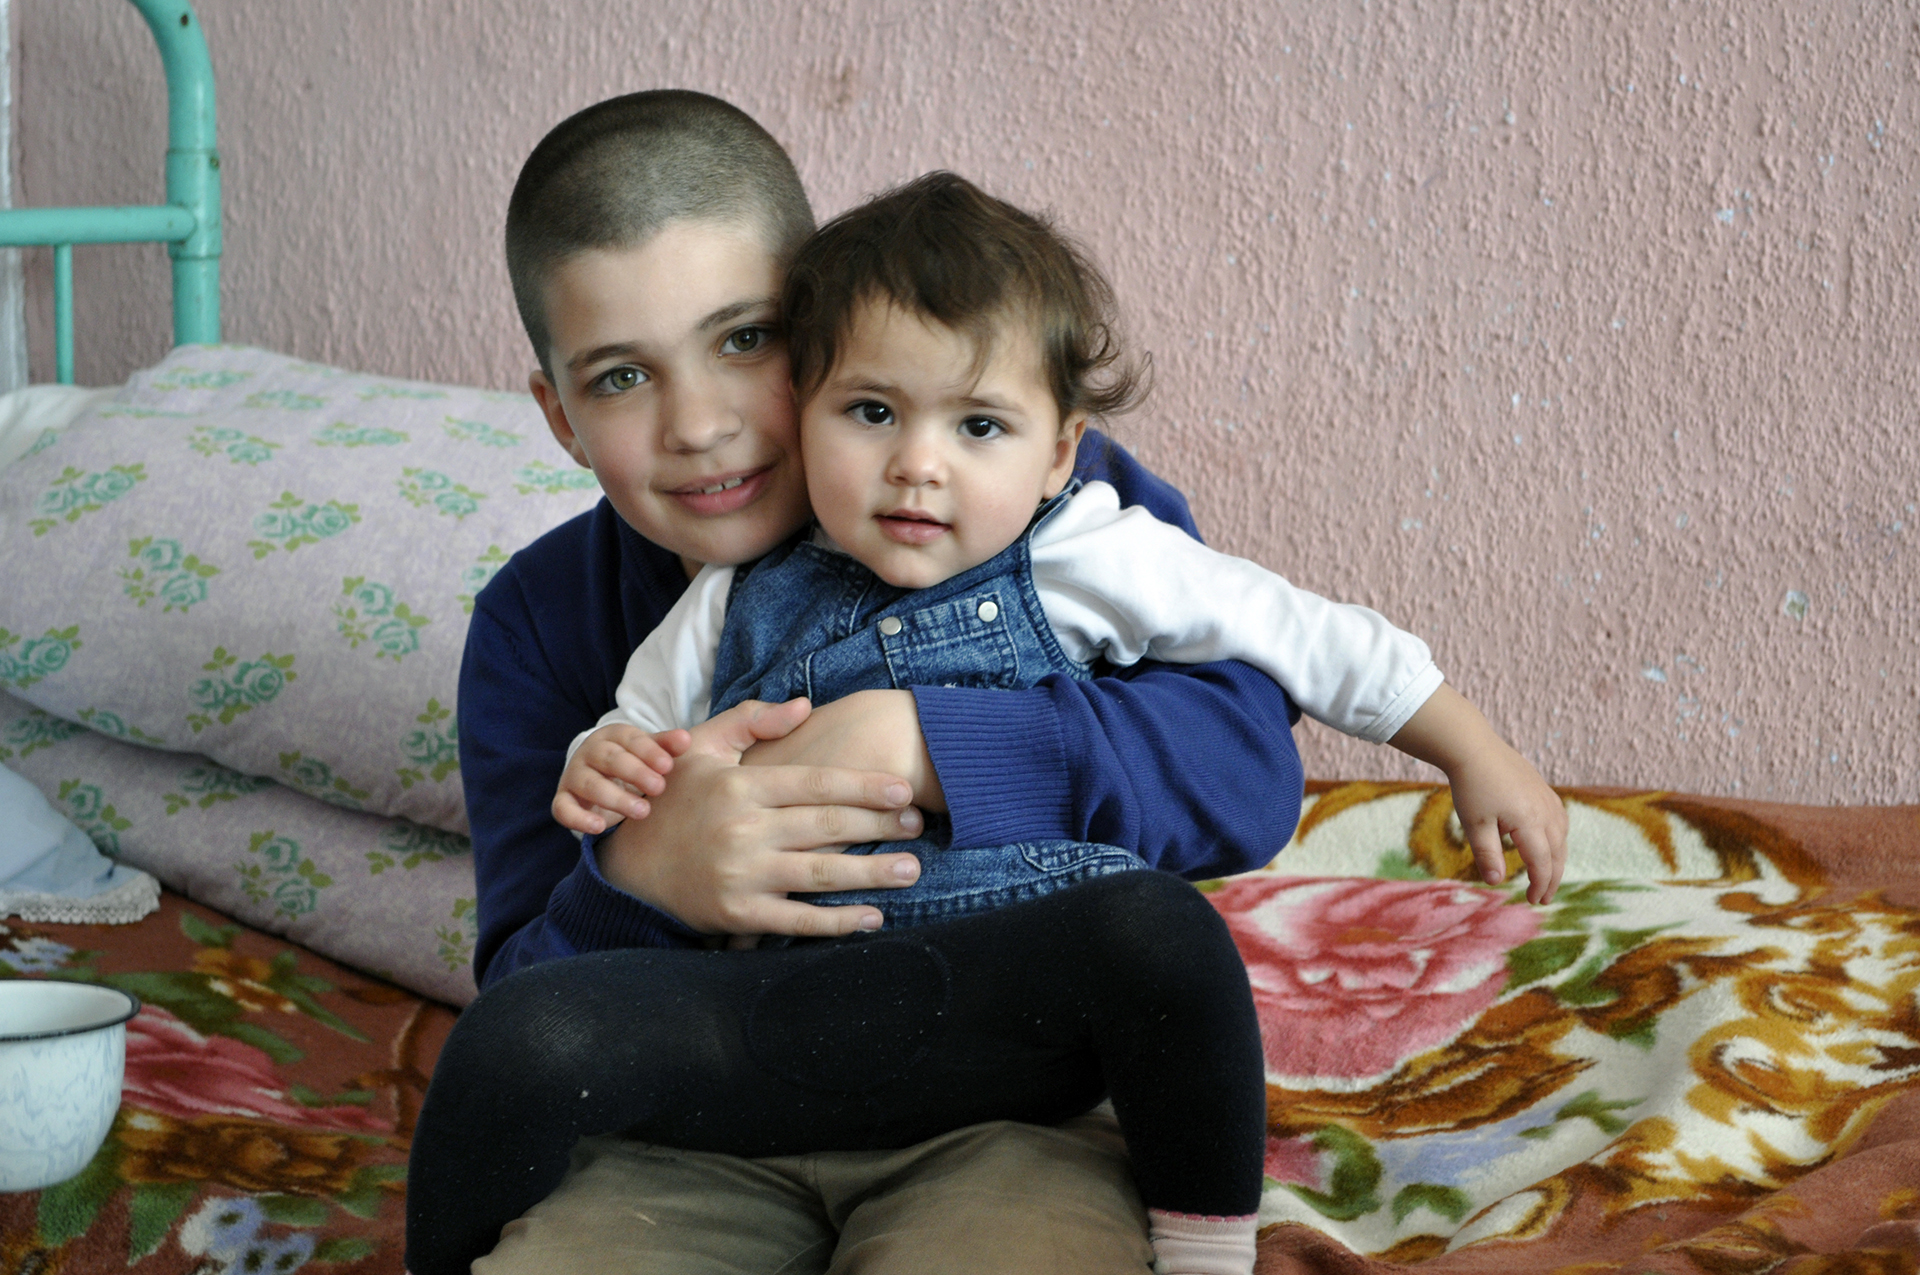 A young Moldovan boy holds his baby sister while they sit on the bed and smile at the camera